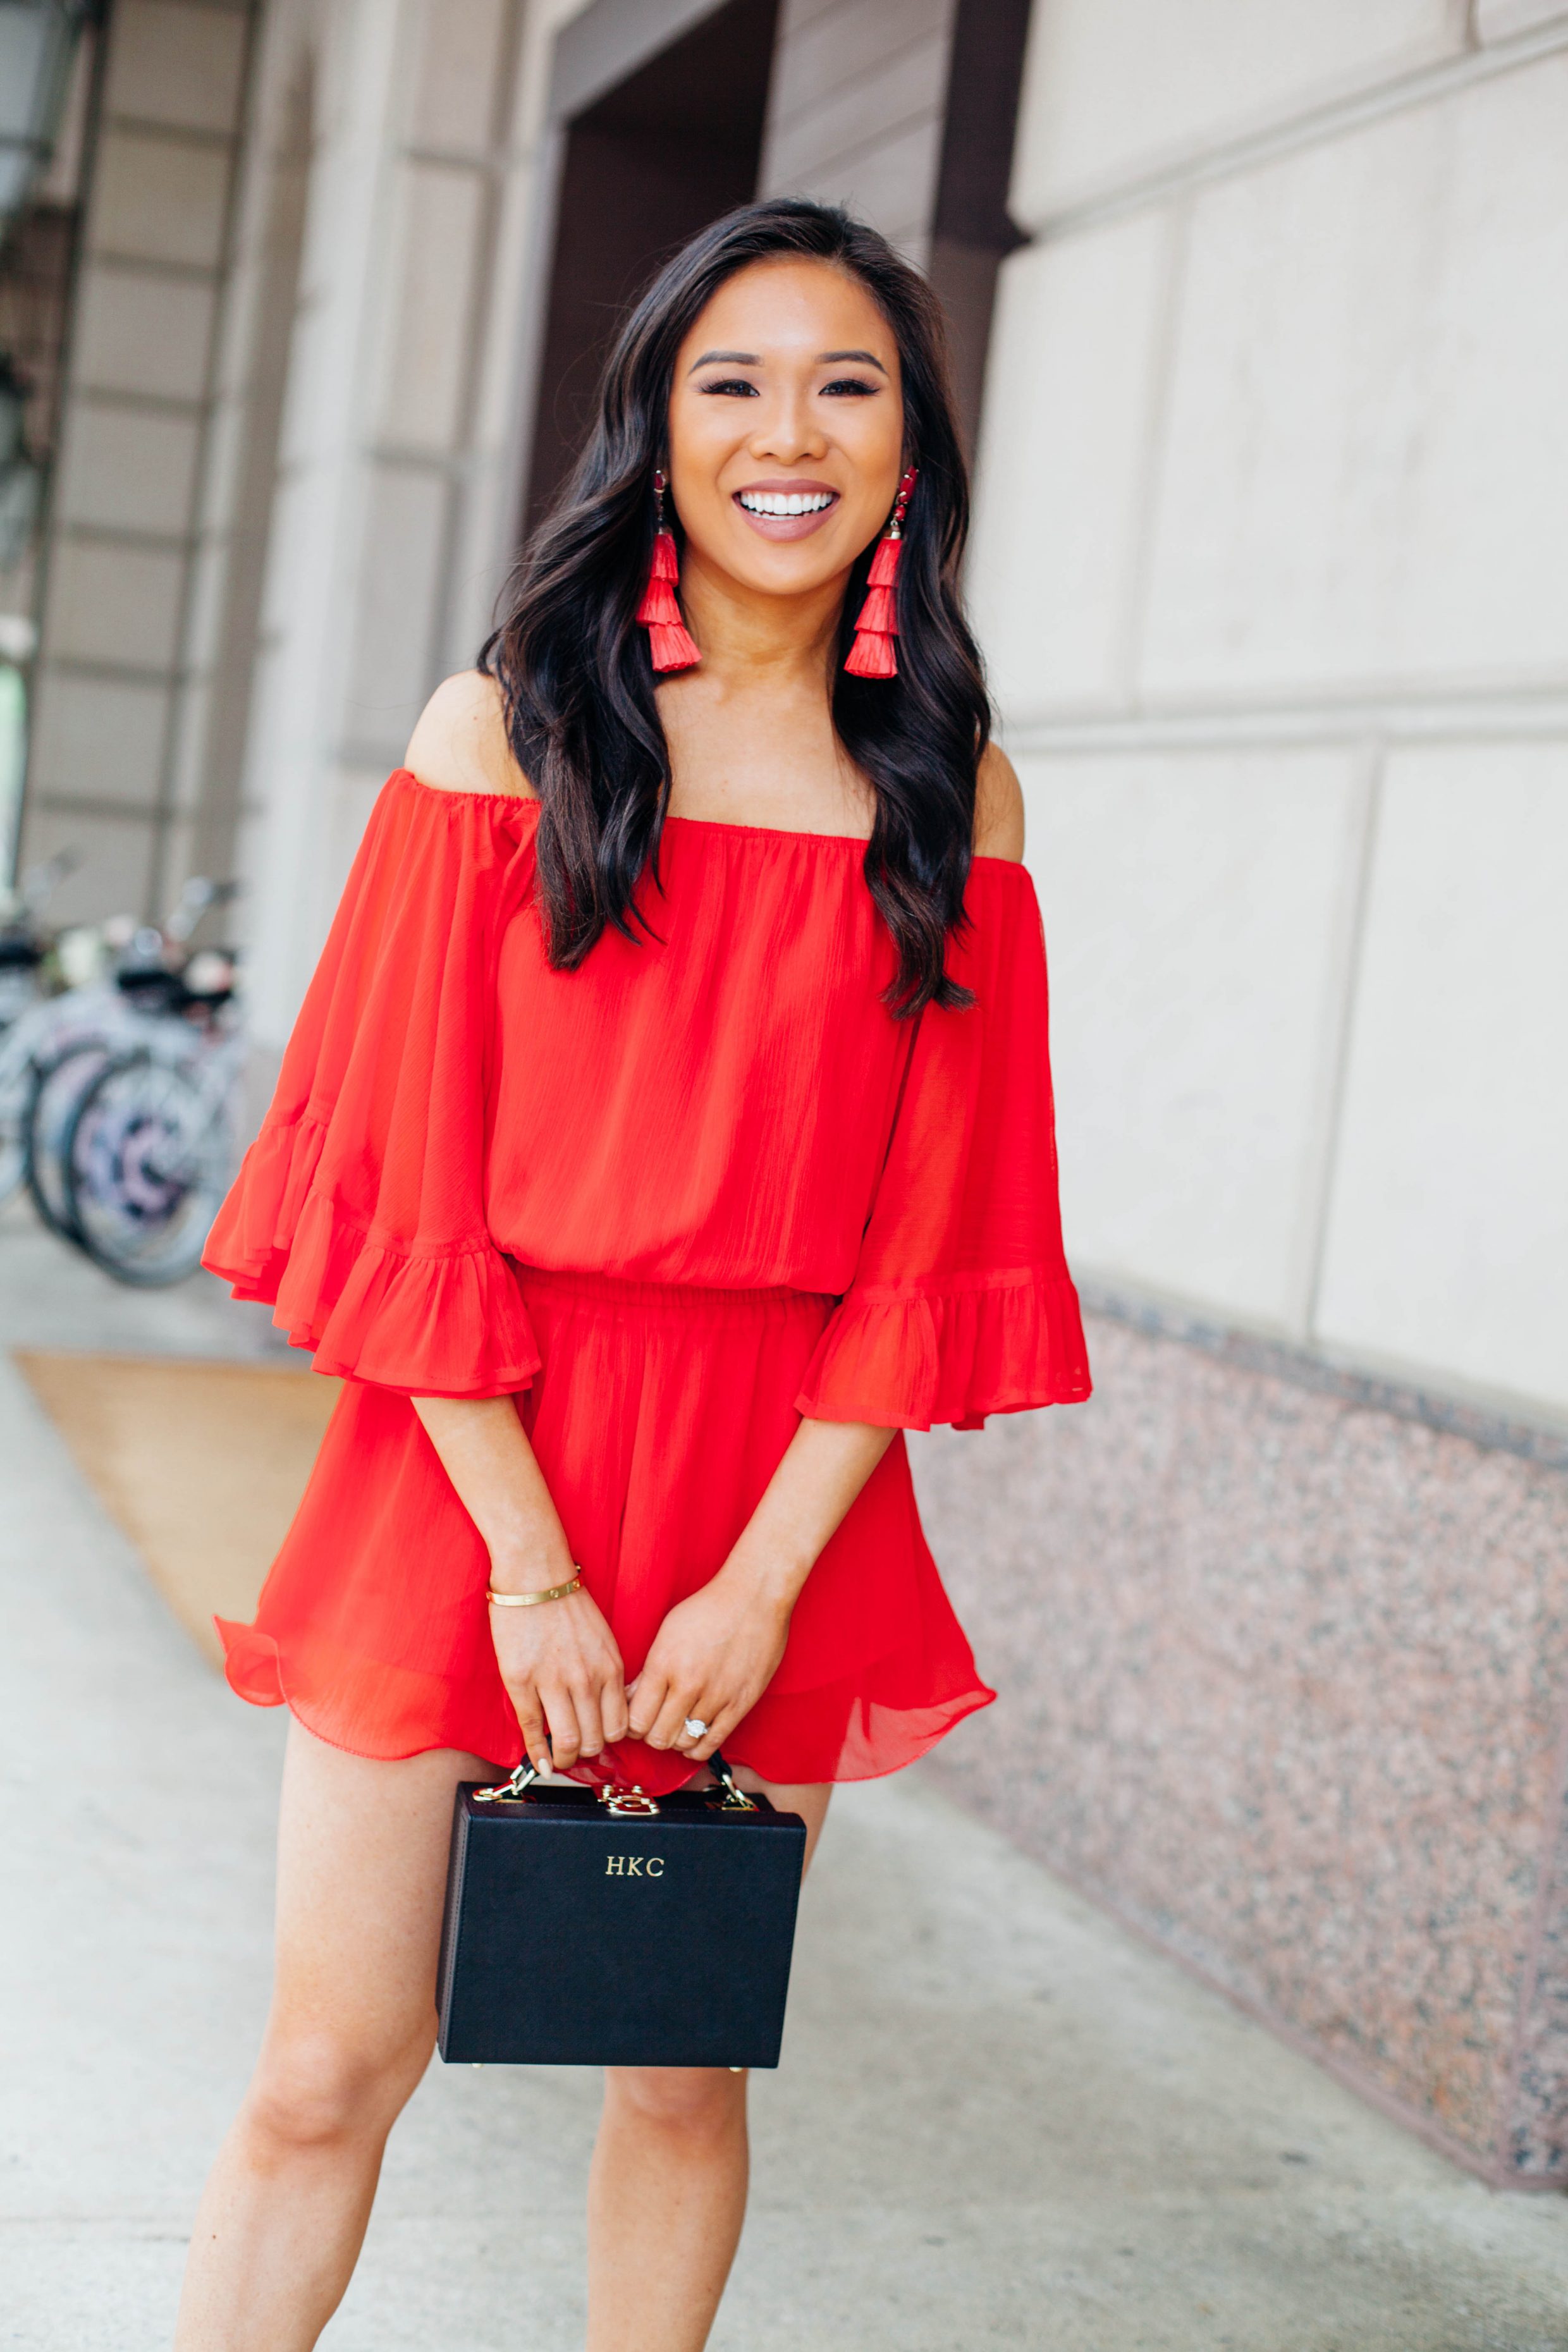 Hoang-Kim wears a red off the shoulder romper with tassel earrings and black box bag